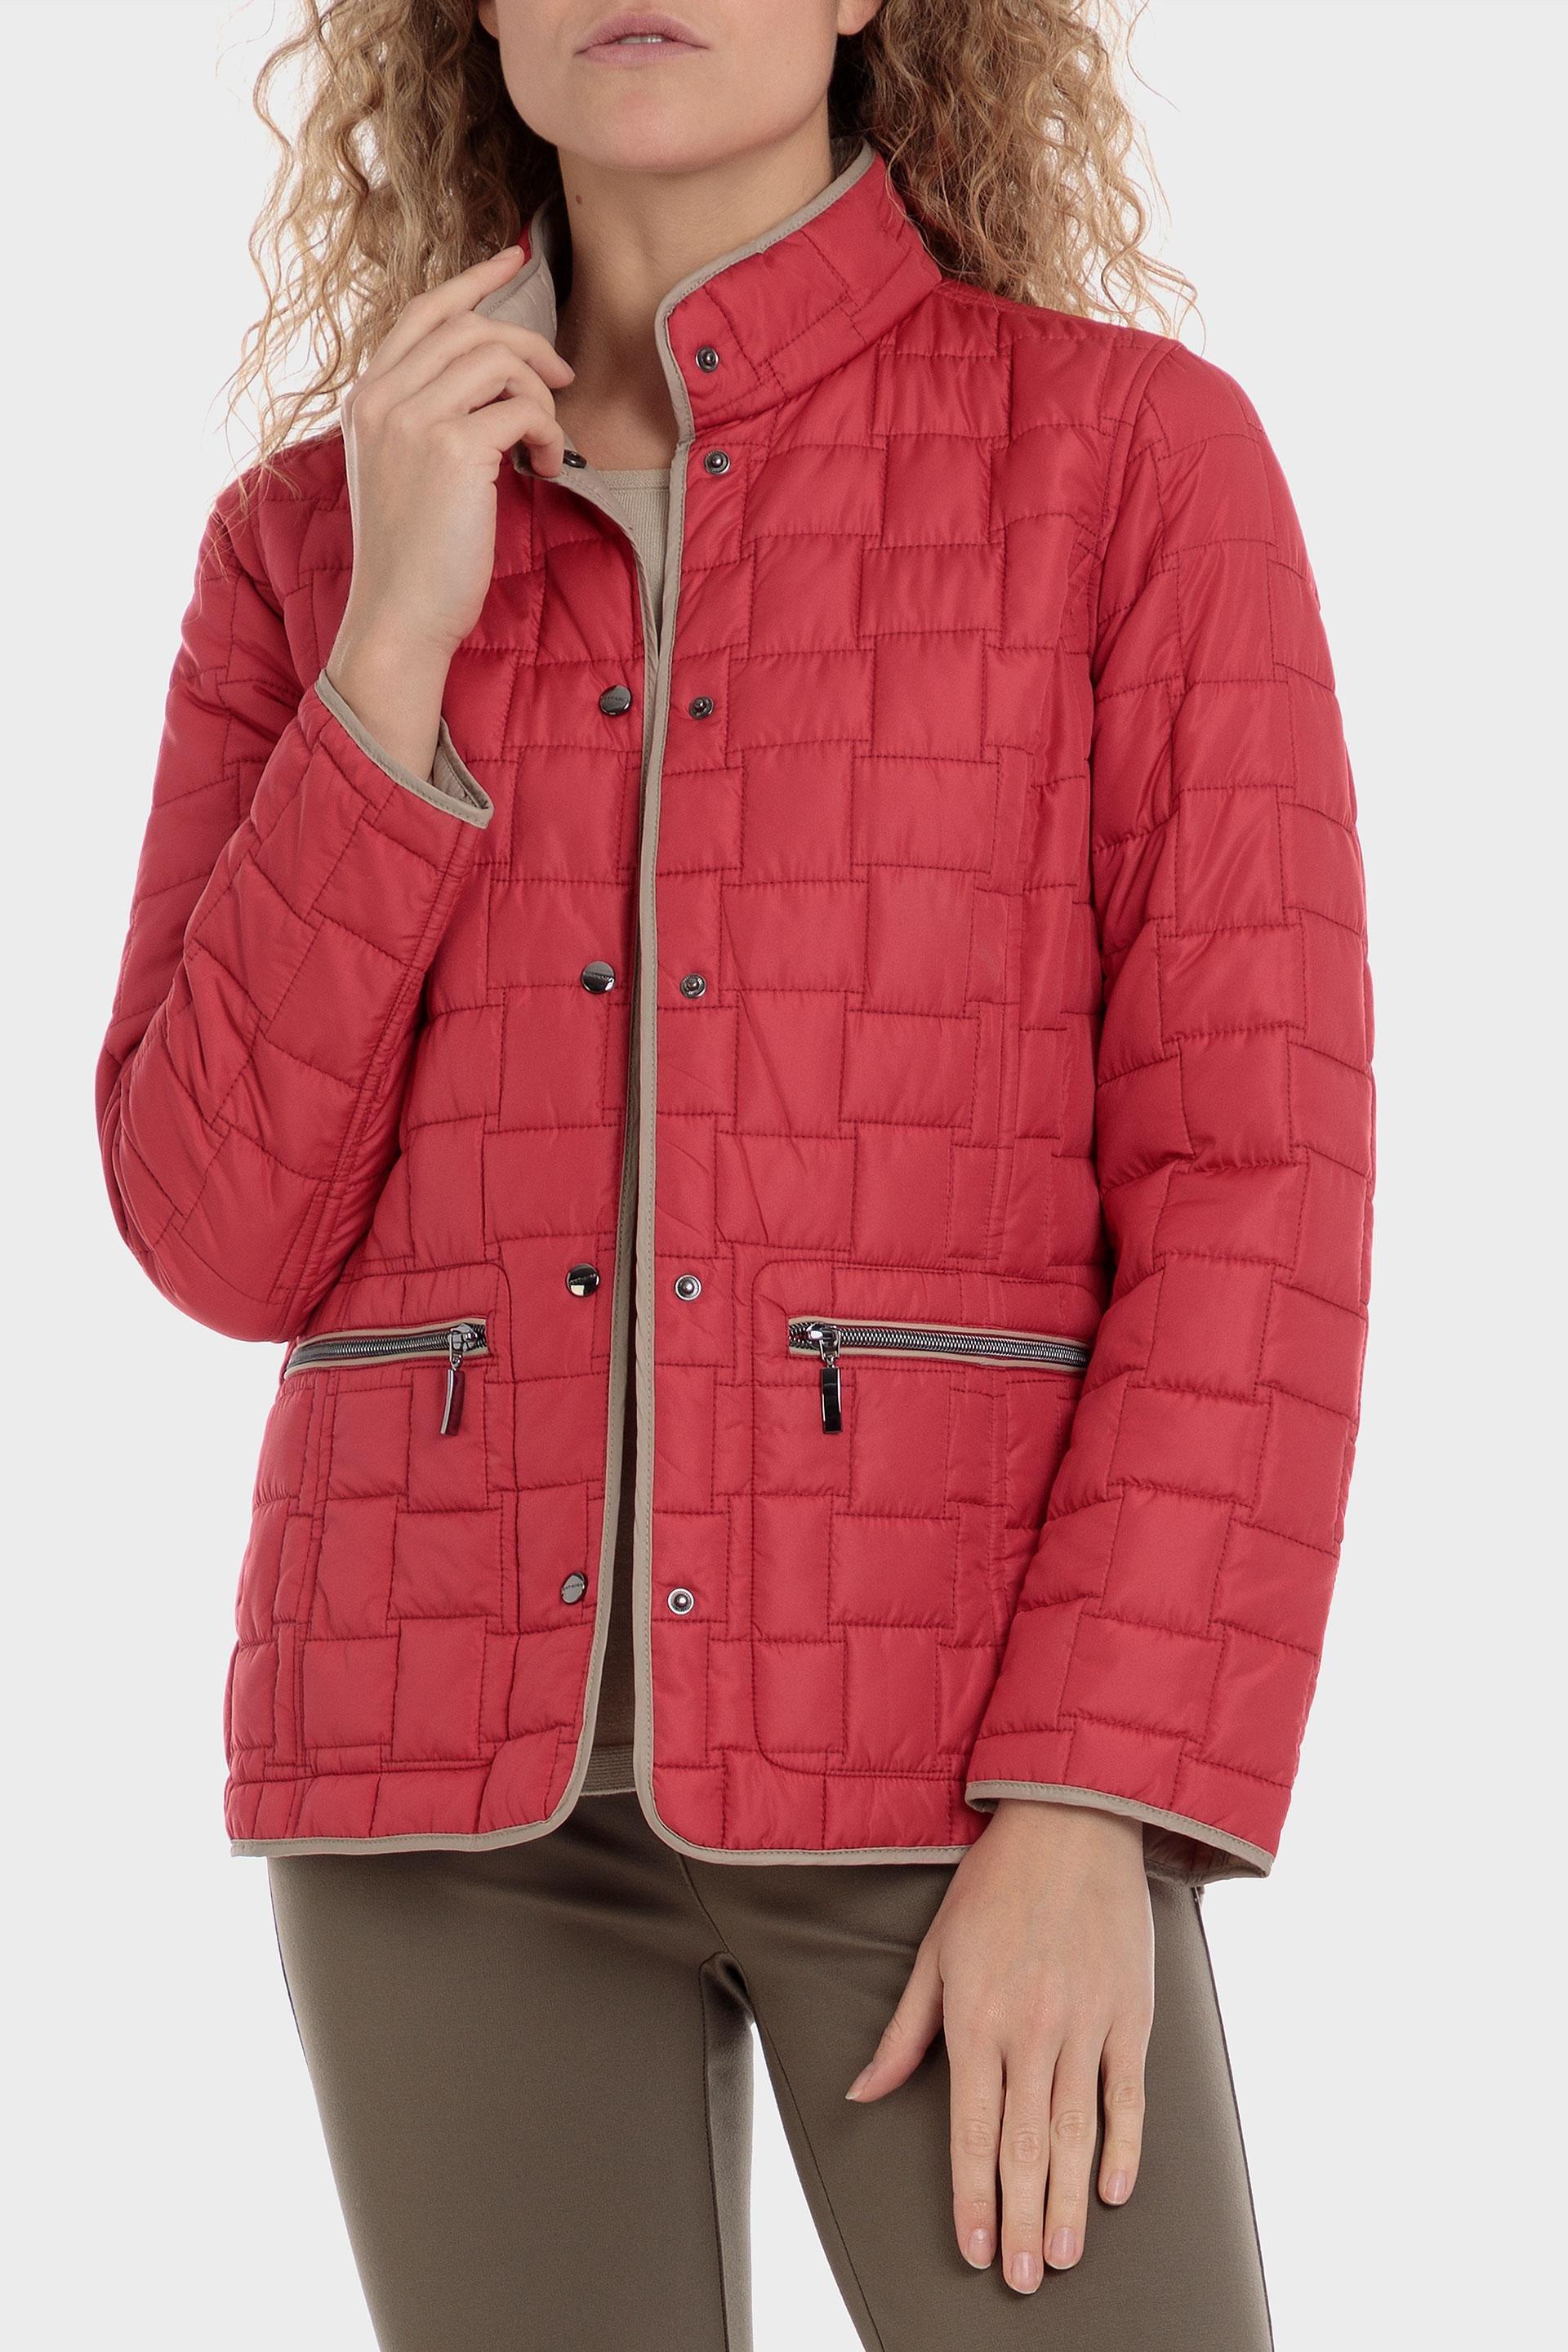 Punt Roma - Red Reversible Parka